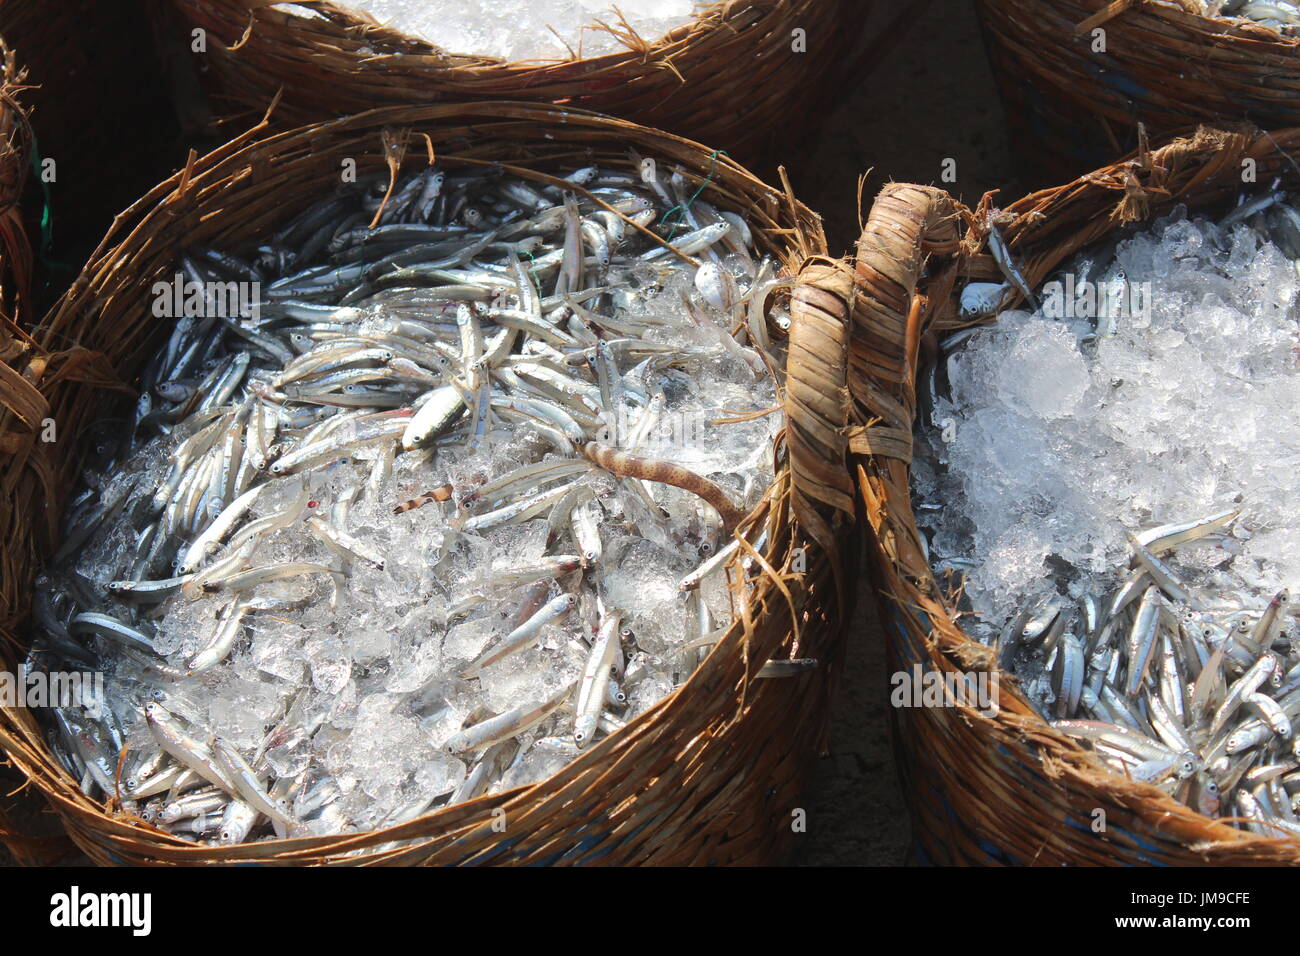 https://c8.alamy.com/comp/JM9CFE/fishes-in-bamboo-baskets-with-ice-at-mui-ne-beach-JM9CFE.jpg